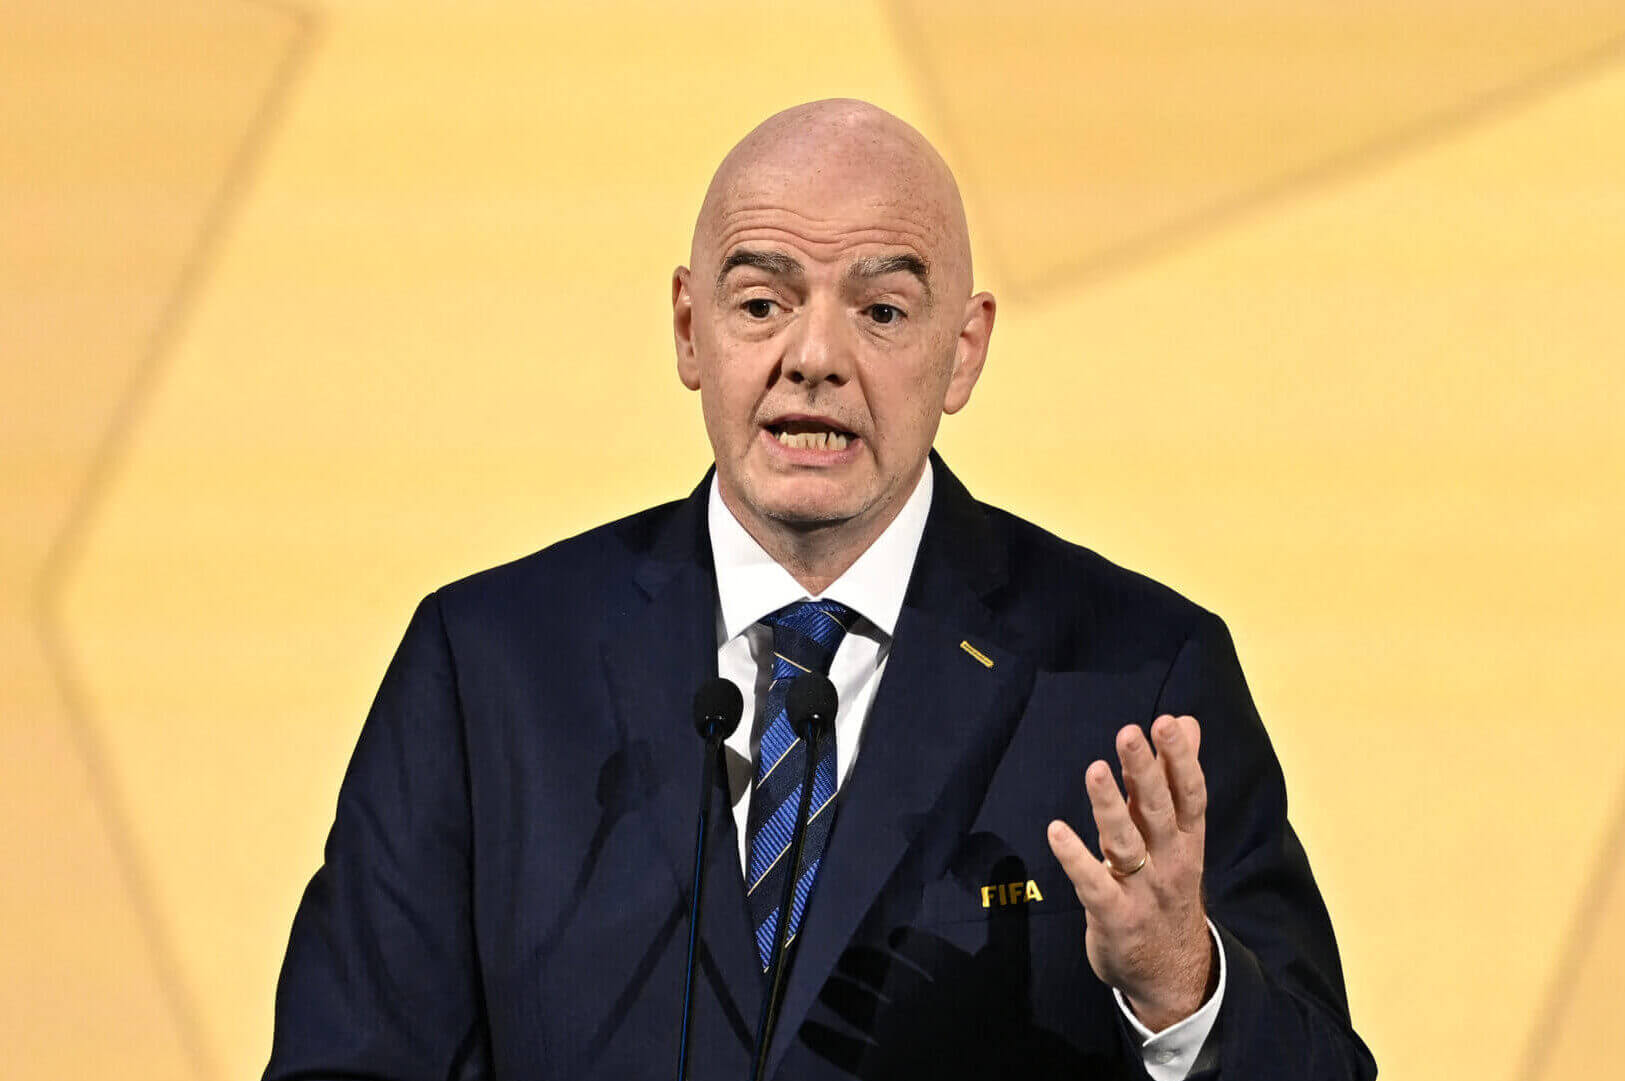 Infantino hits back at criticism of FIFA over 'overloaded' calendar